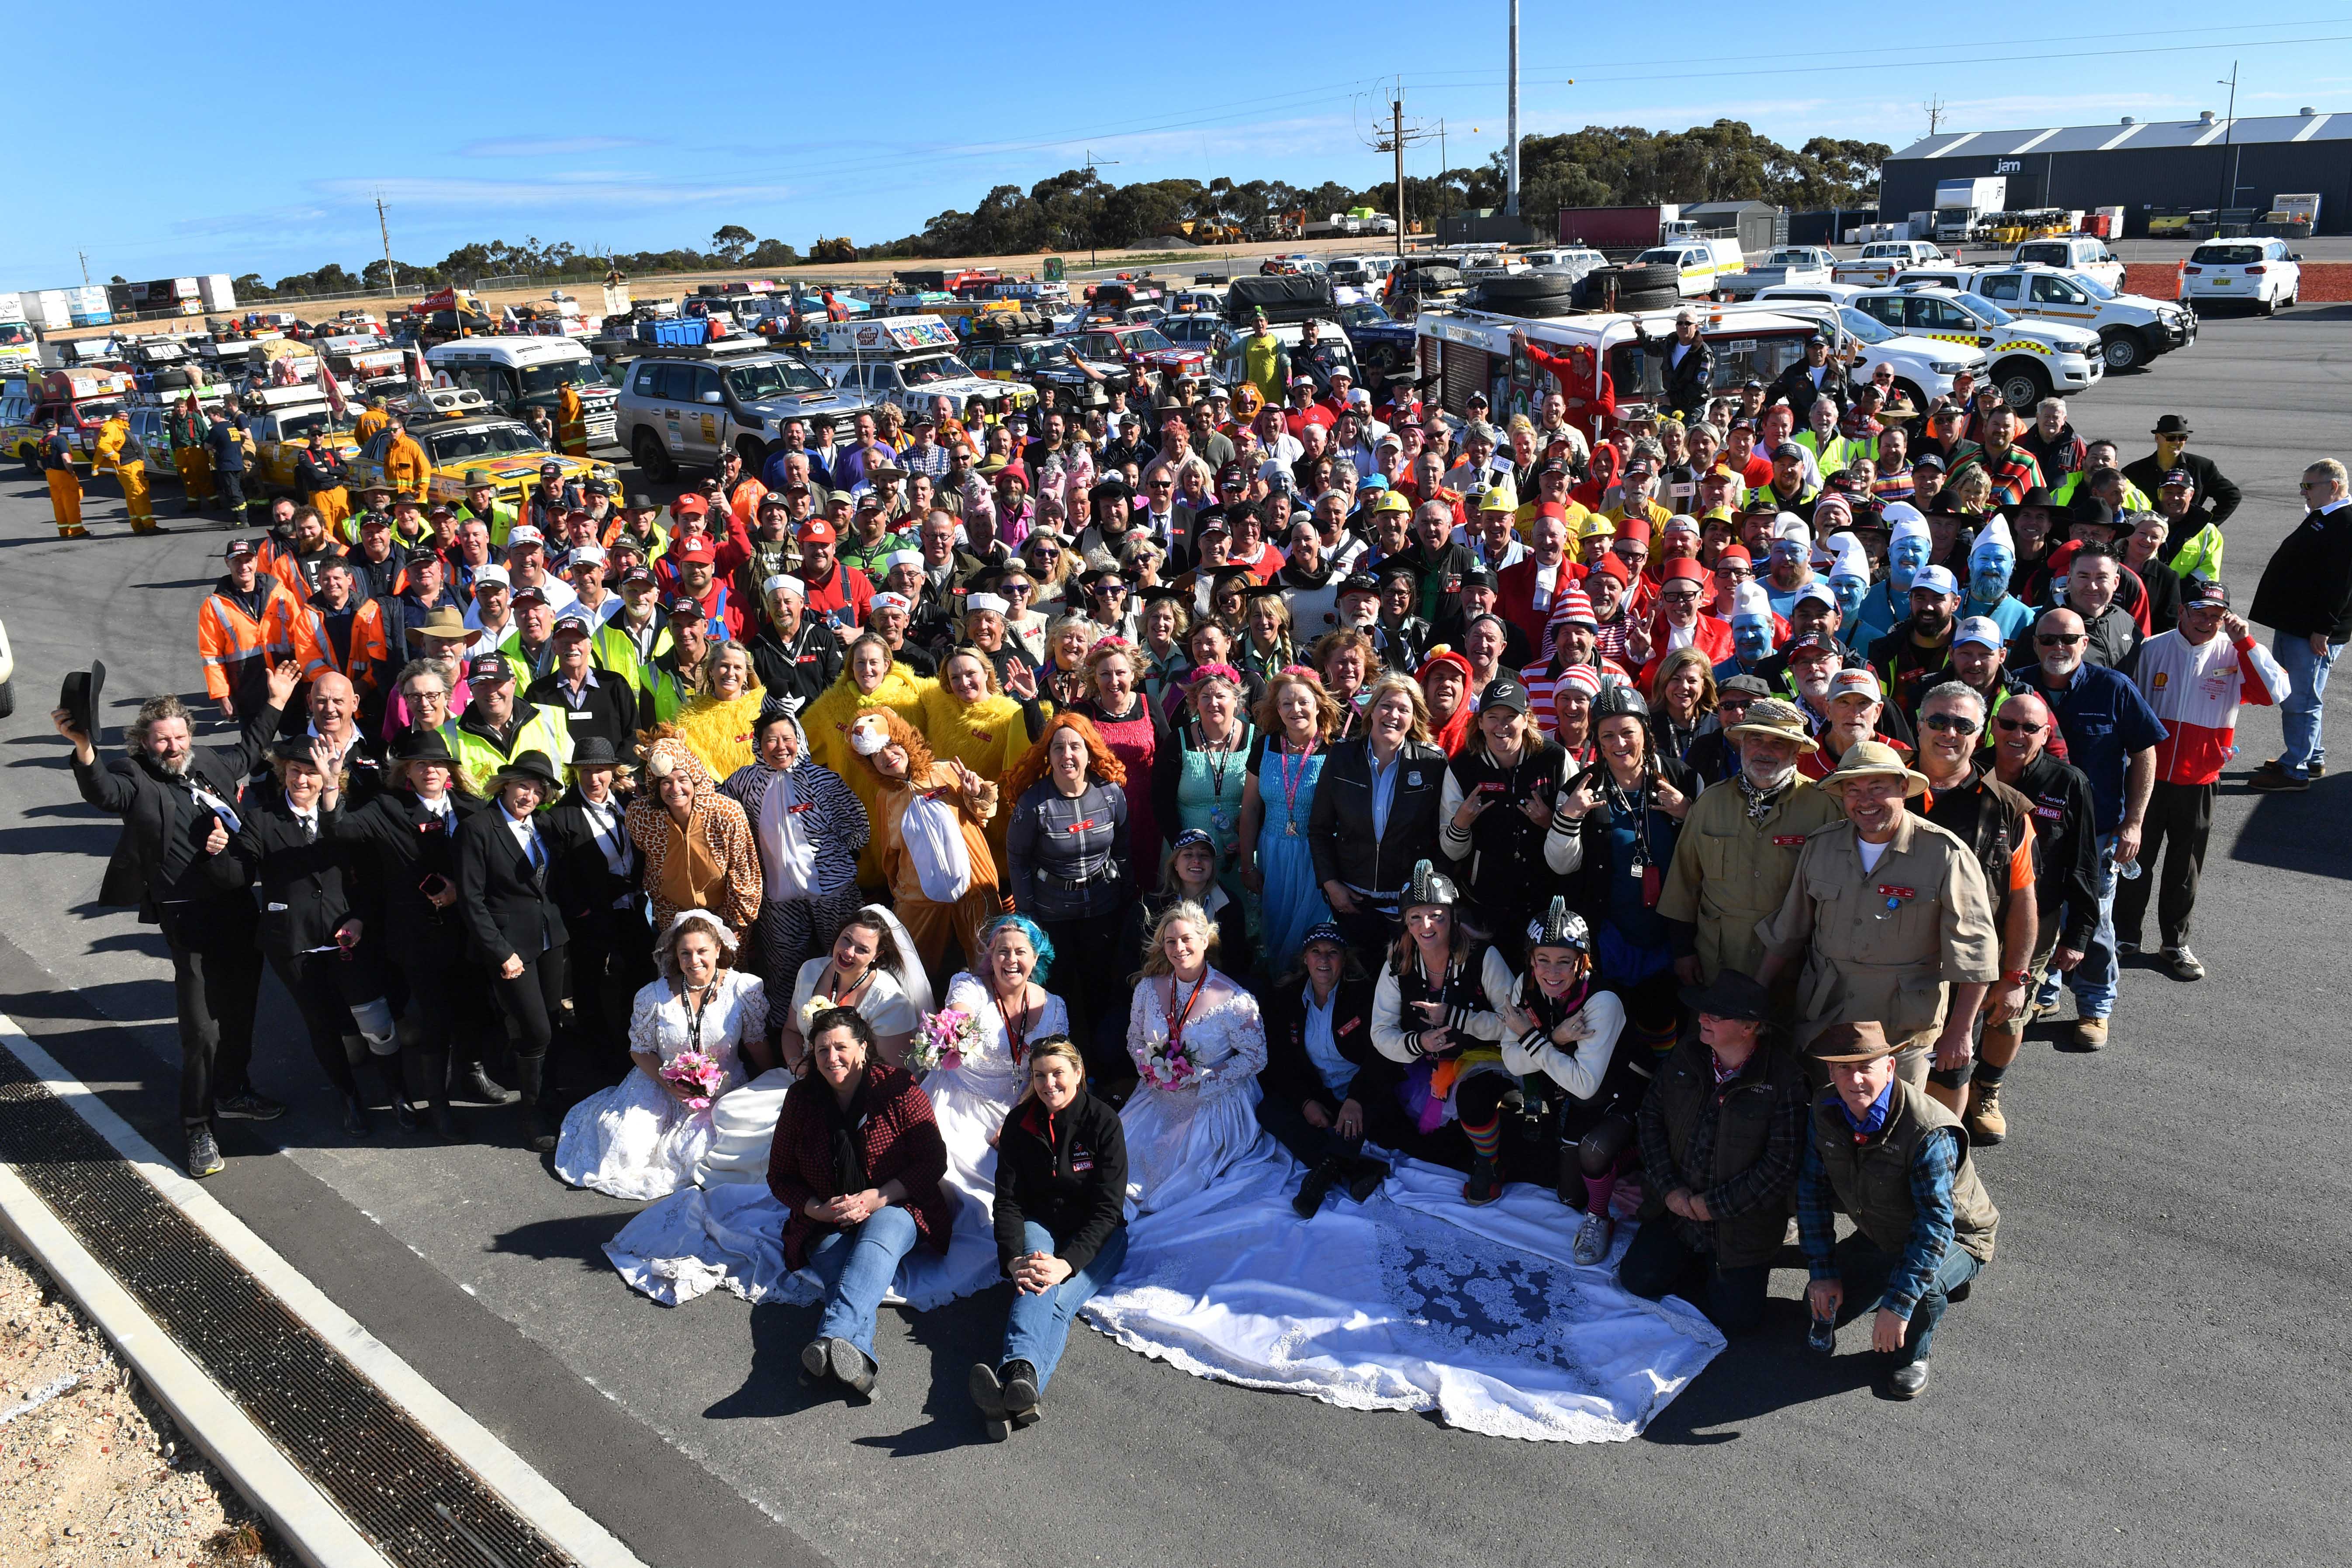 Entrants on the SA Variety Bash (2019) – ‘Mawson to The Murray’ raised a fantastic 1.94 million (net) for SA kids in need